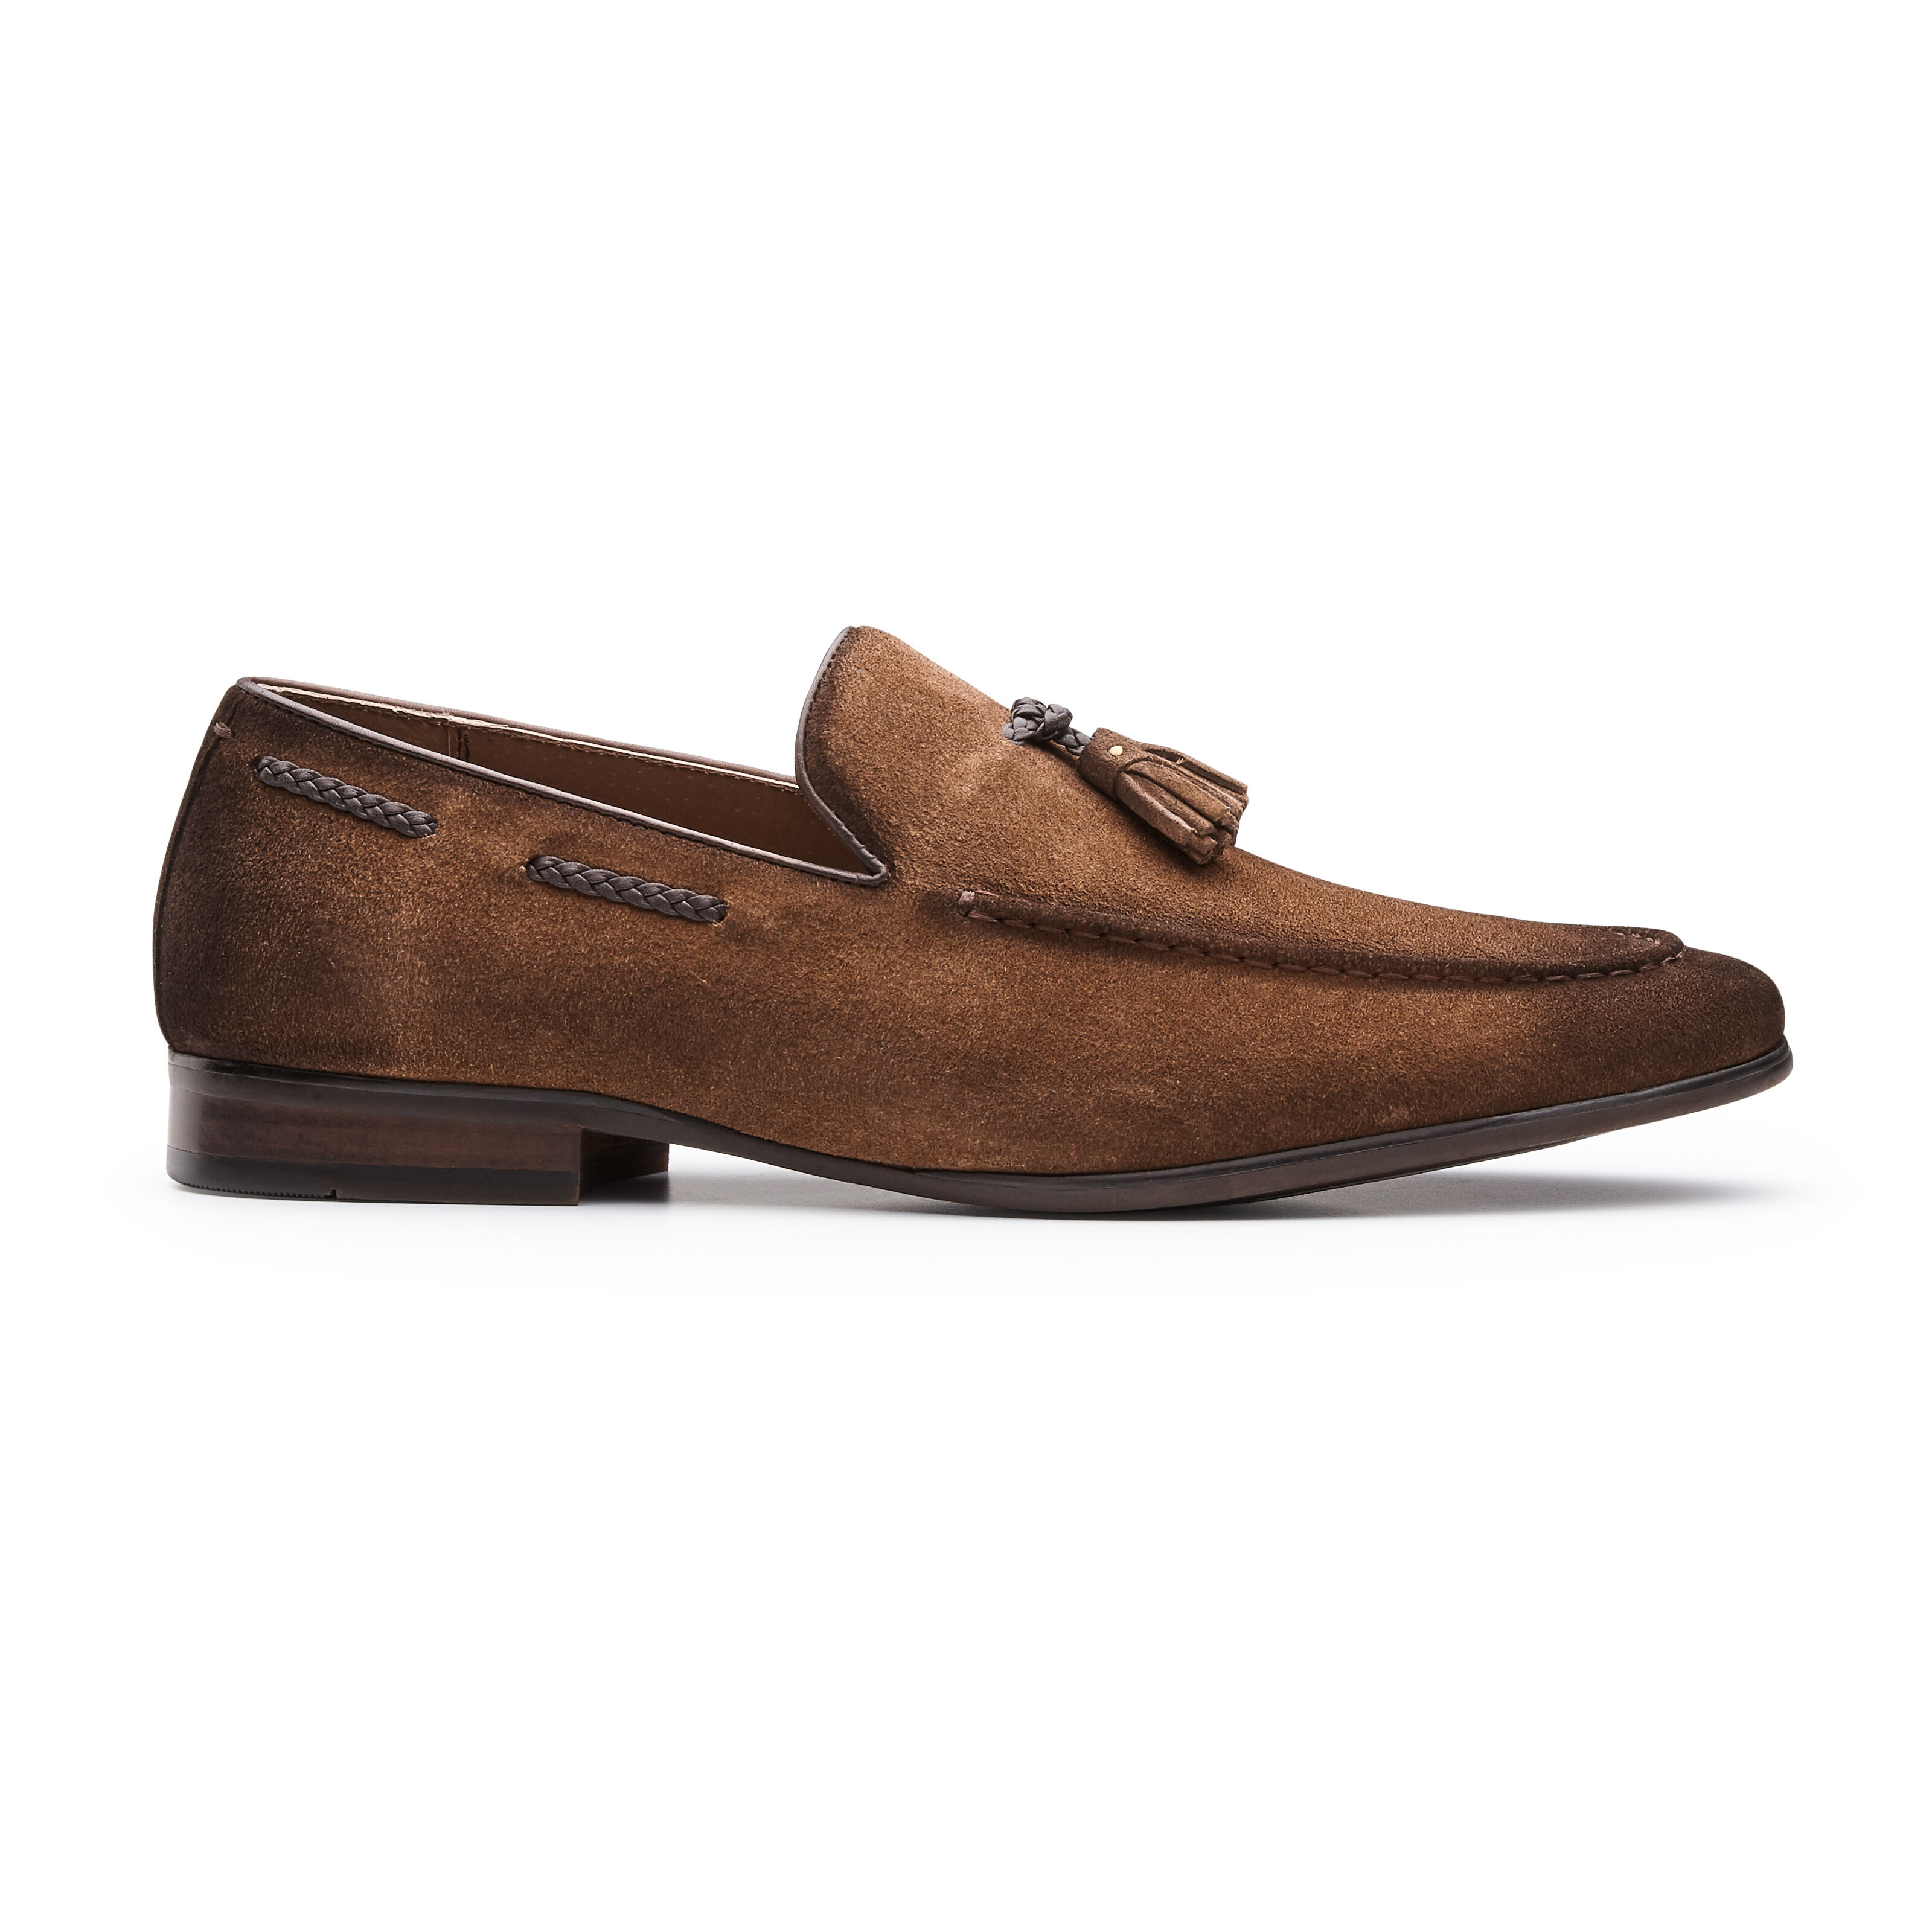 suede dress loafers